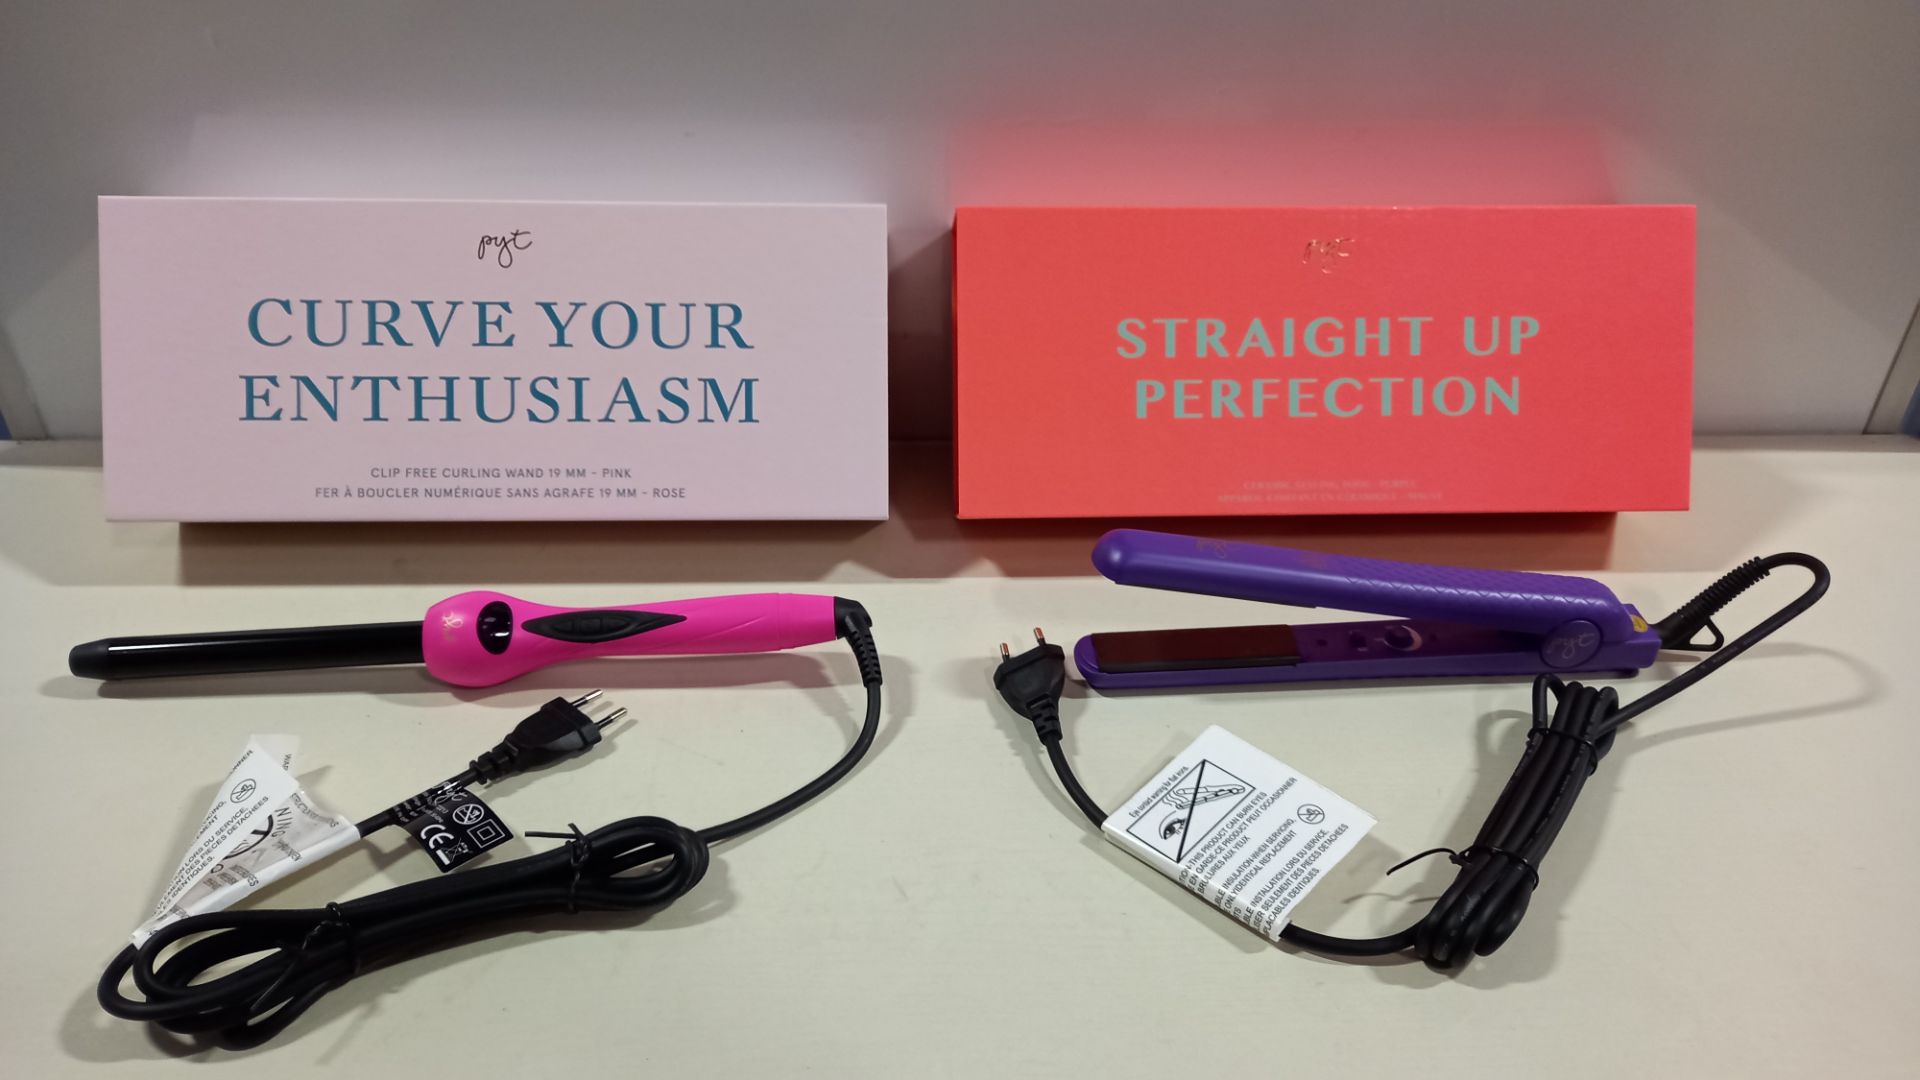 2 X BRAND NEW PYT (PRETTY YOUNG THING) HAIR STYLING TOOLS IE. 1 X STRAIGHTENER TONGUES PURPLE, 1 X